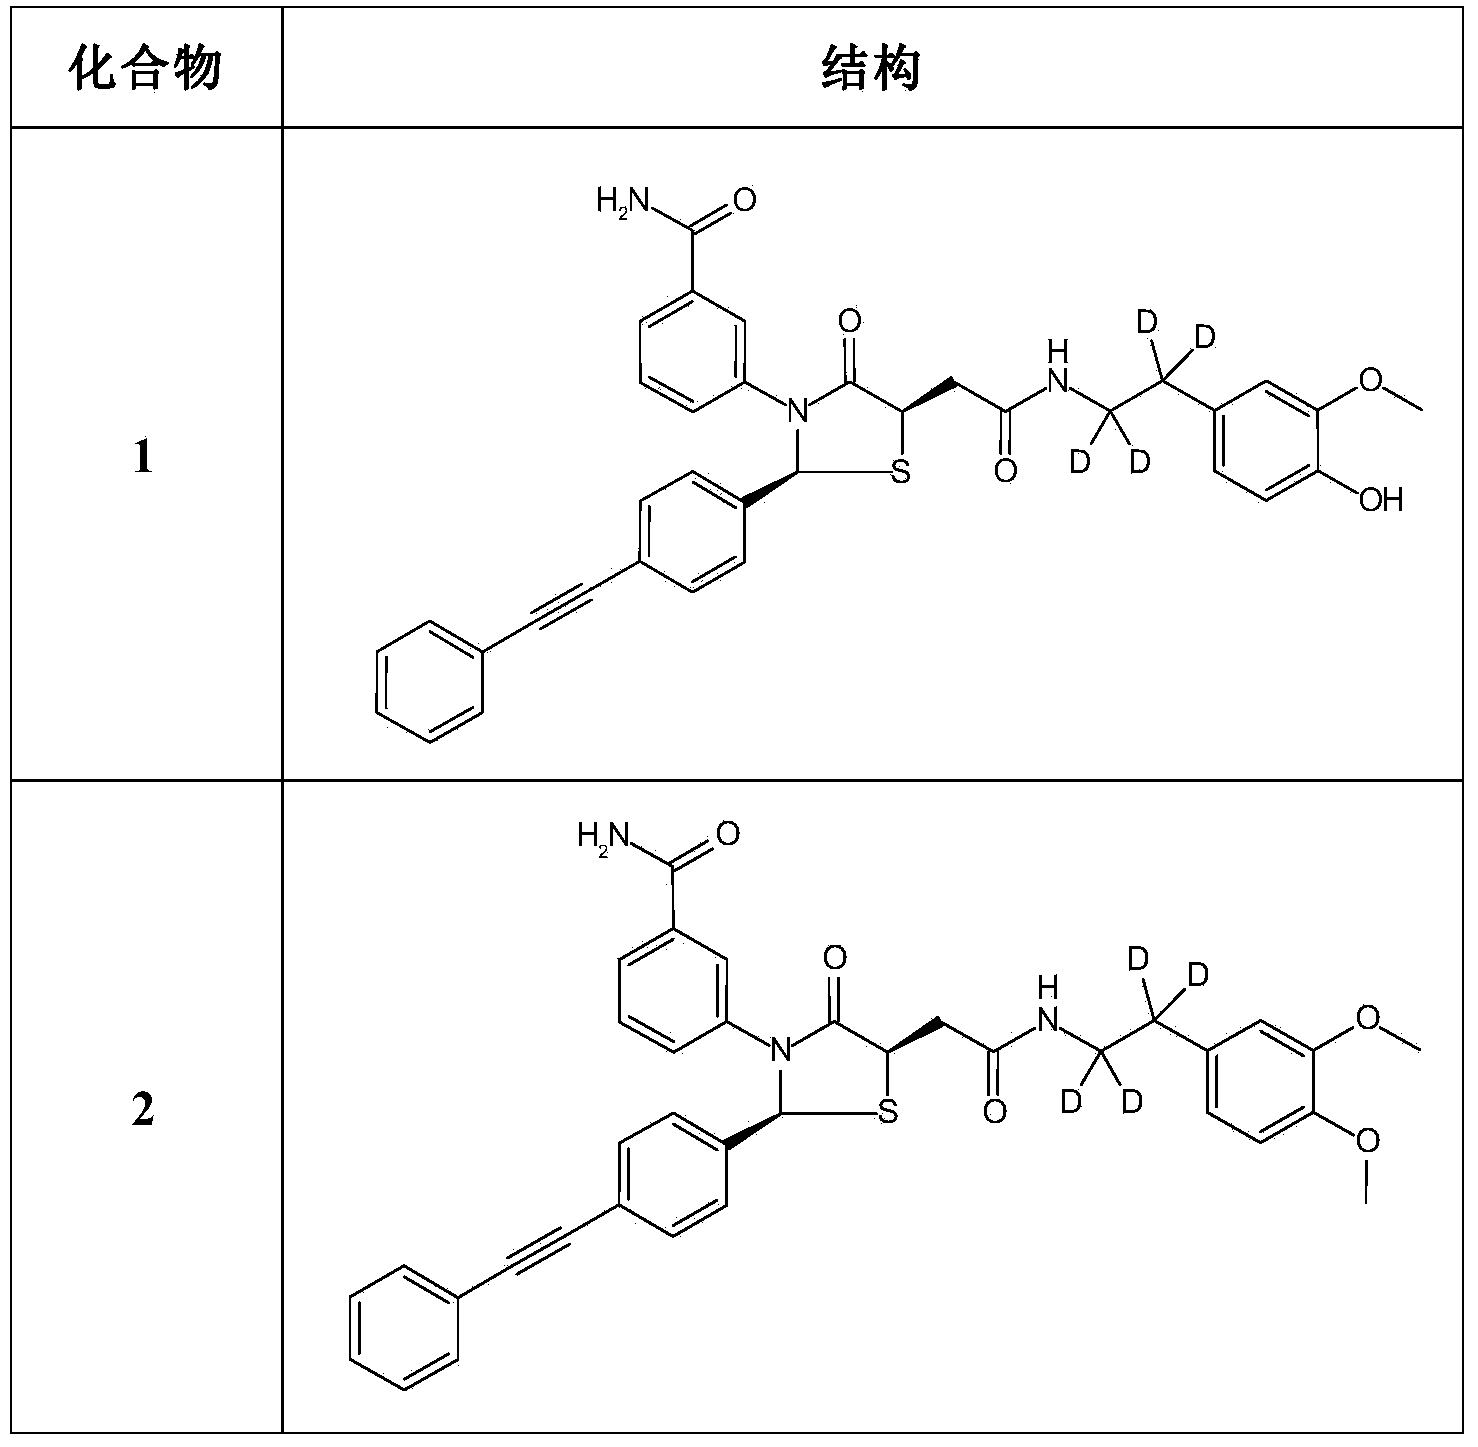 Deuterated thiazolidinone analogues as agonists for follicle stimulating hormone receptor